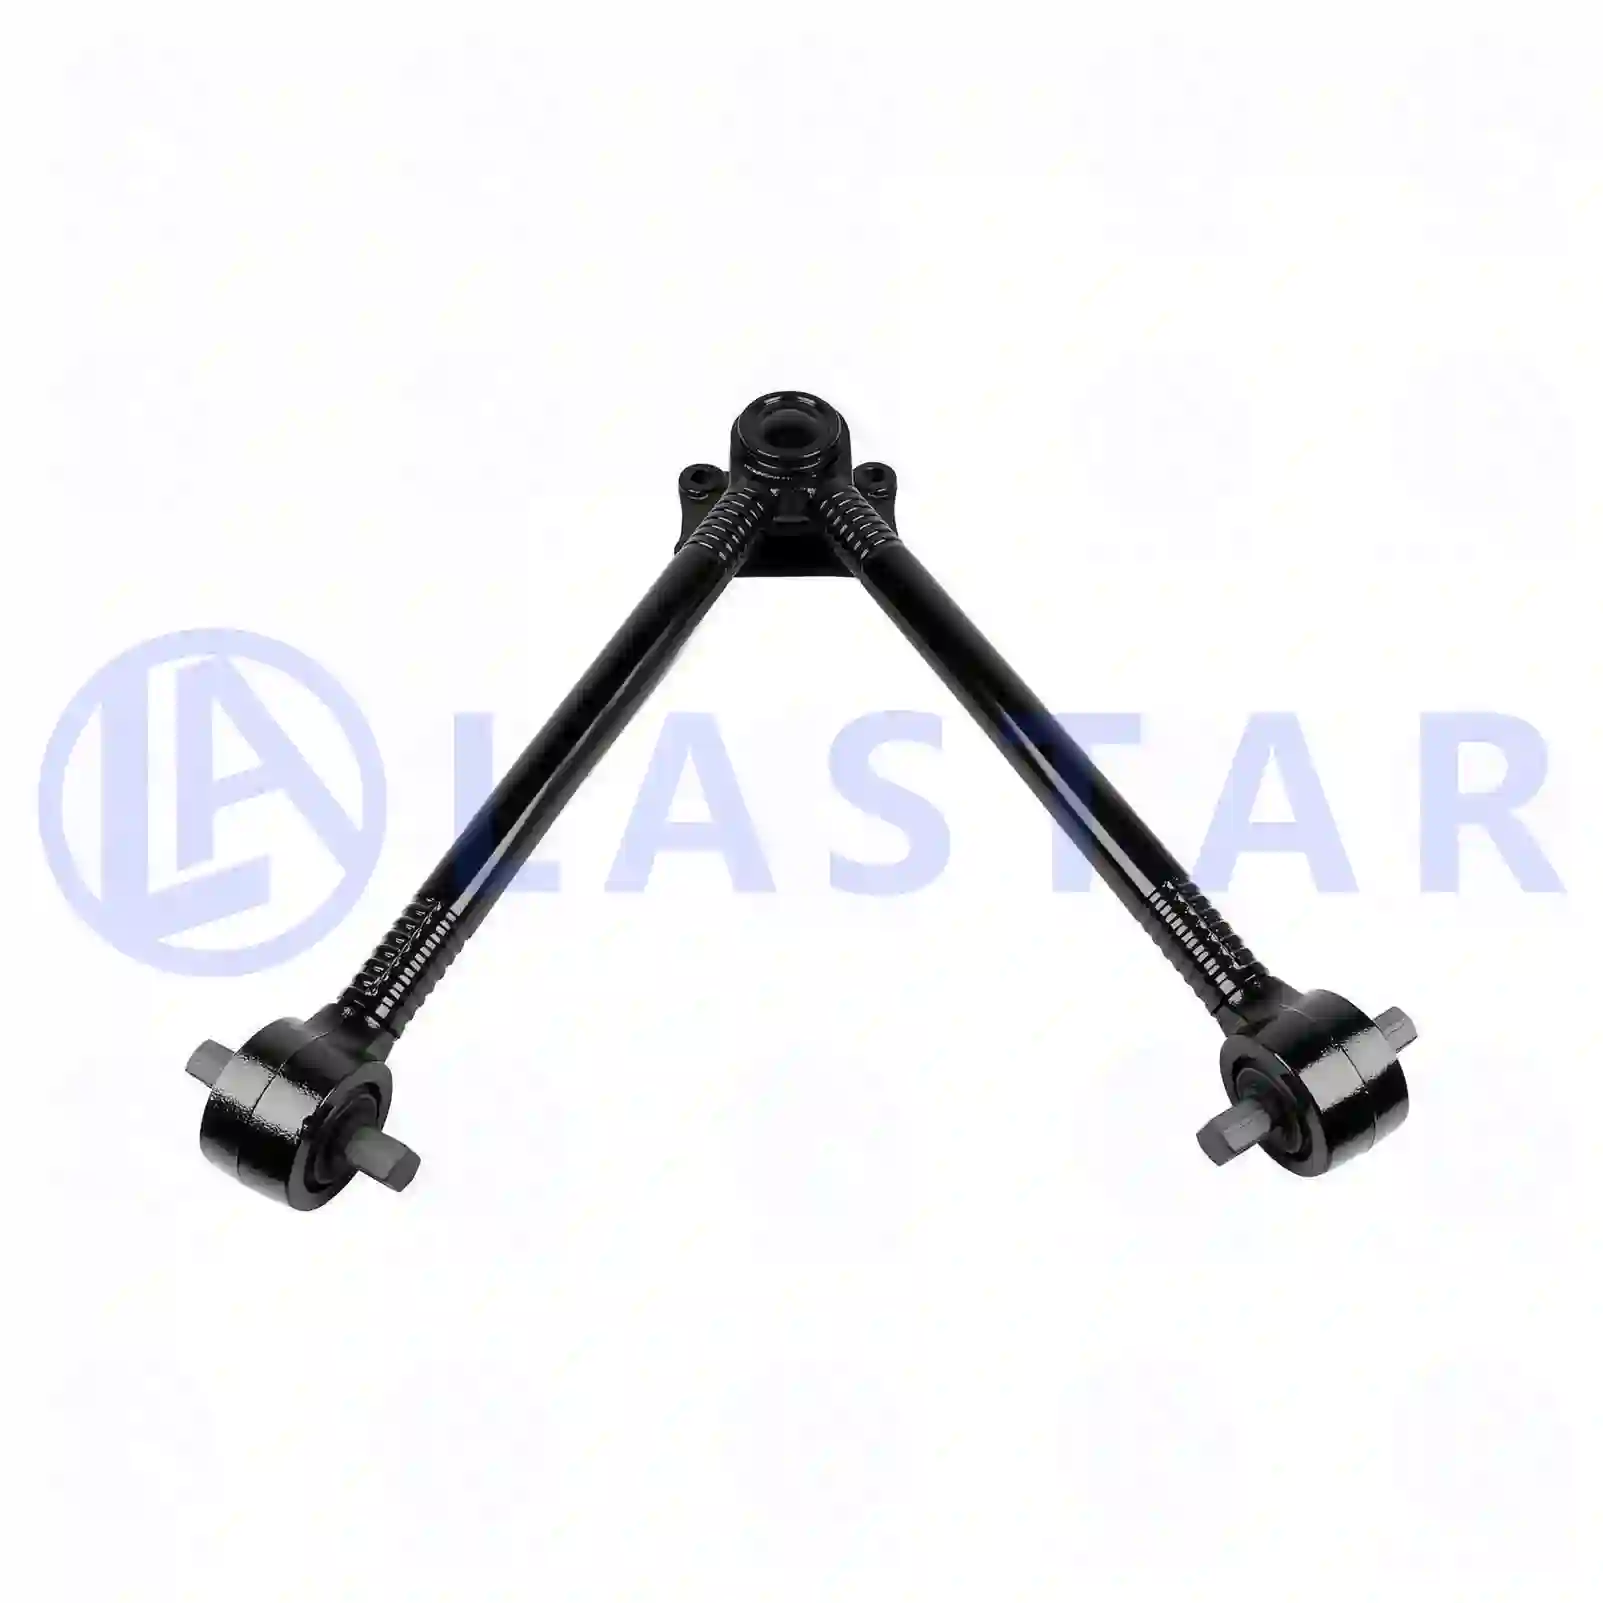  V-stay || Lastar Spare Part | Truck Spare Parts, Auotomotive Spare Parts